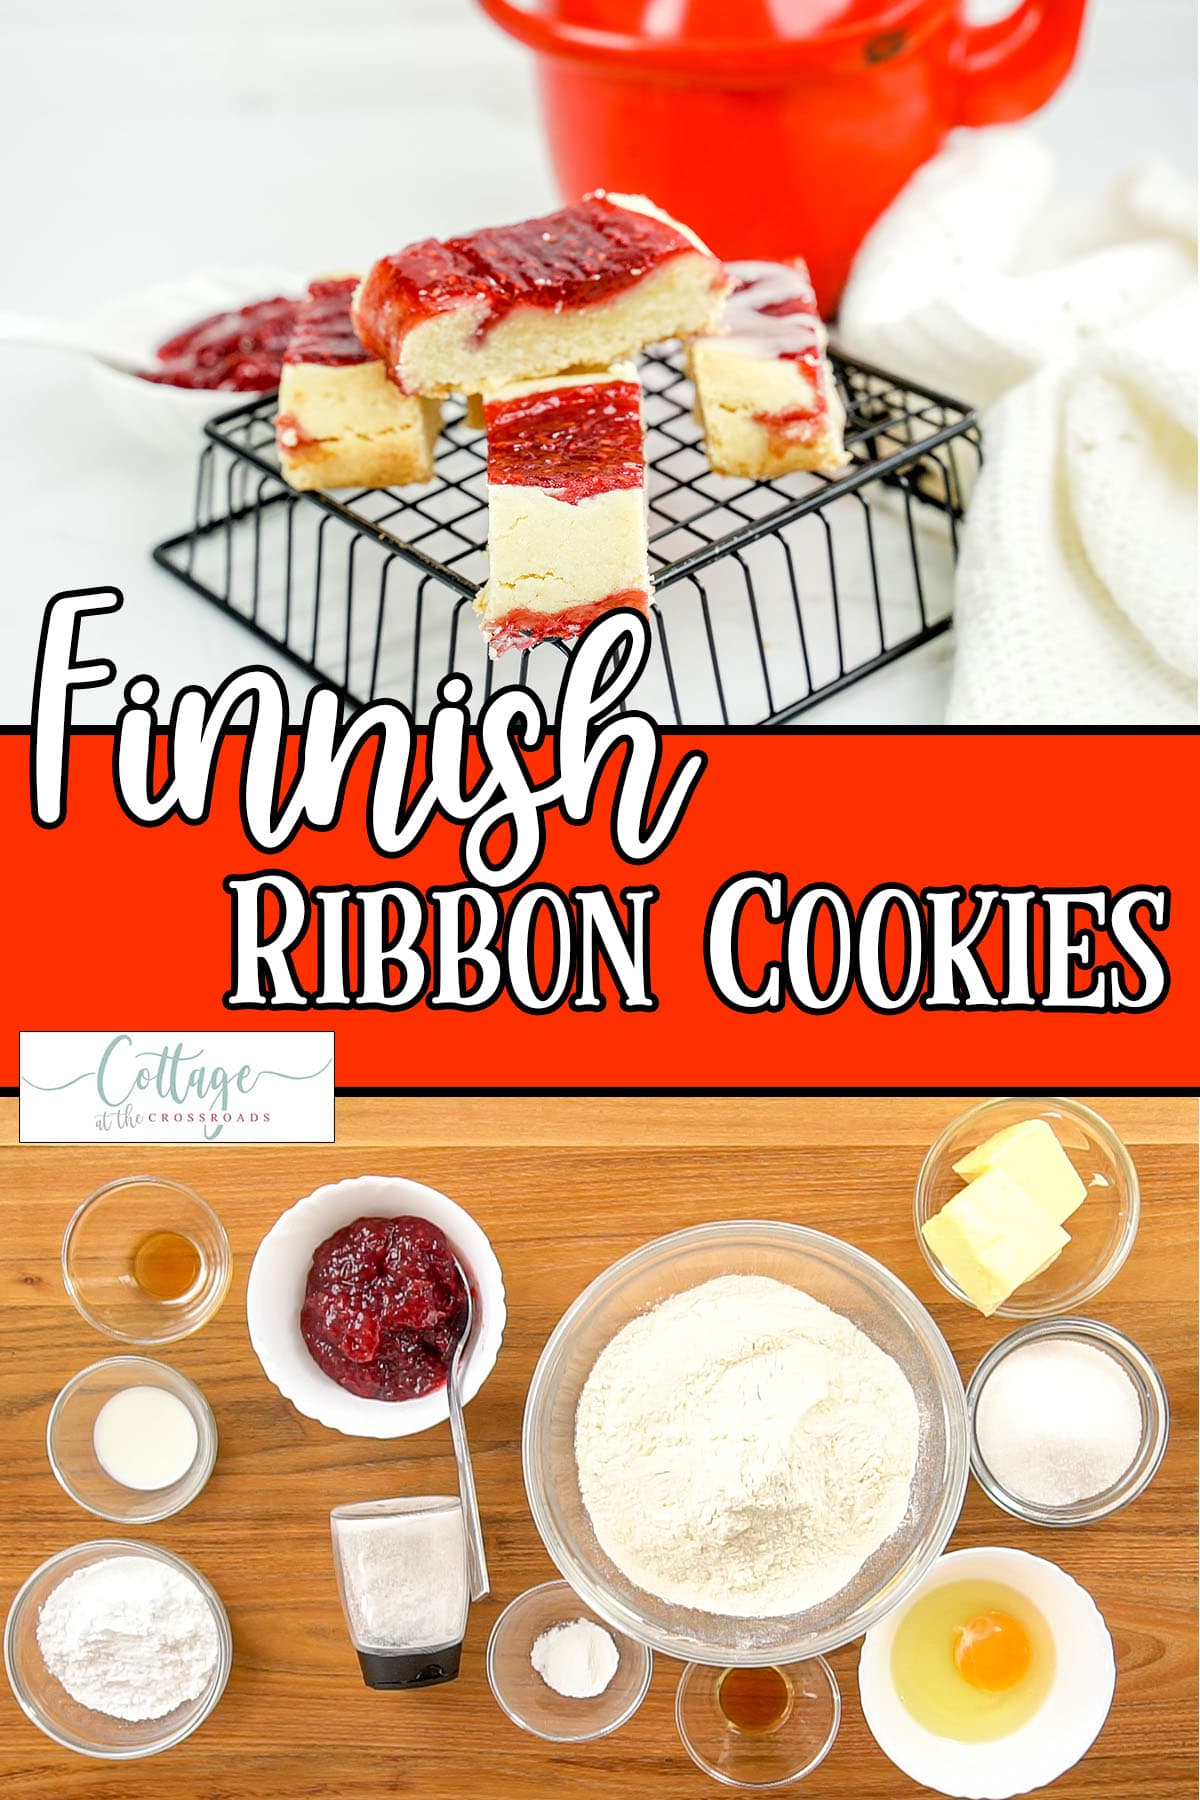 Photo collage of ingredients and finished cookies with text which reads finnish ribbon cookies